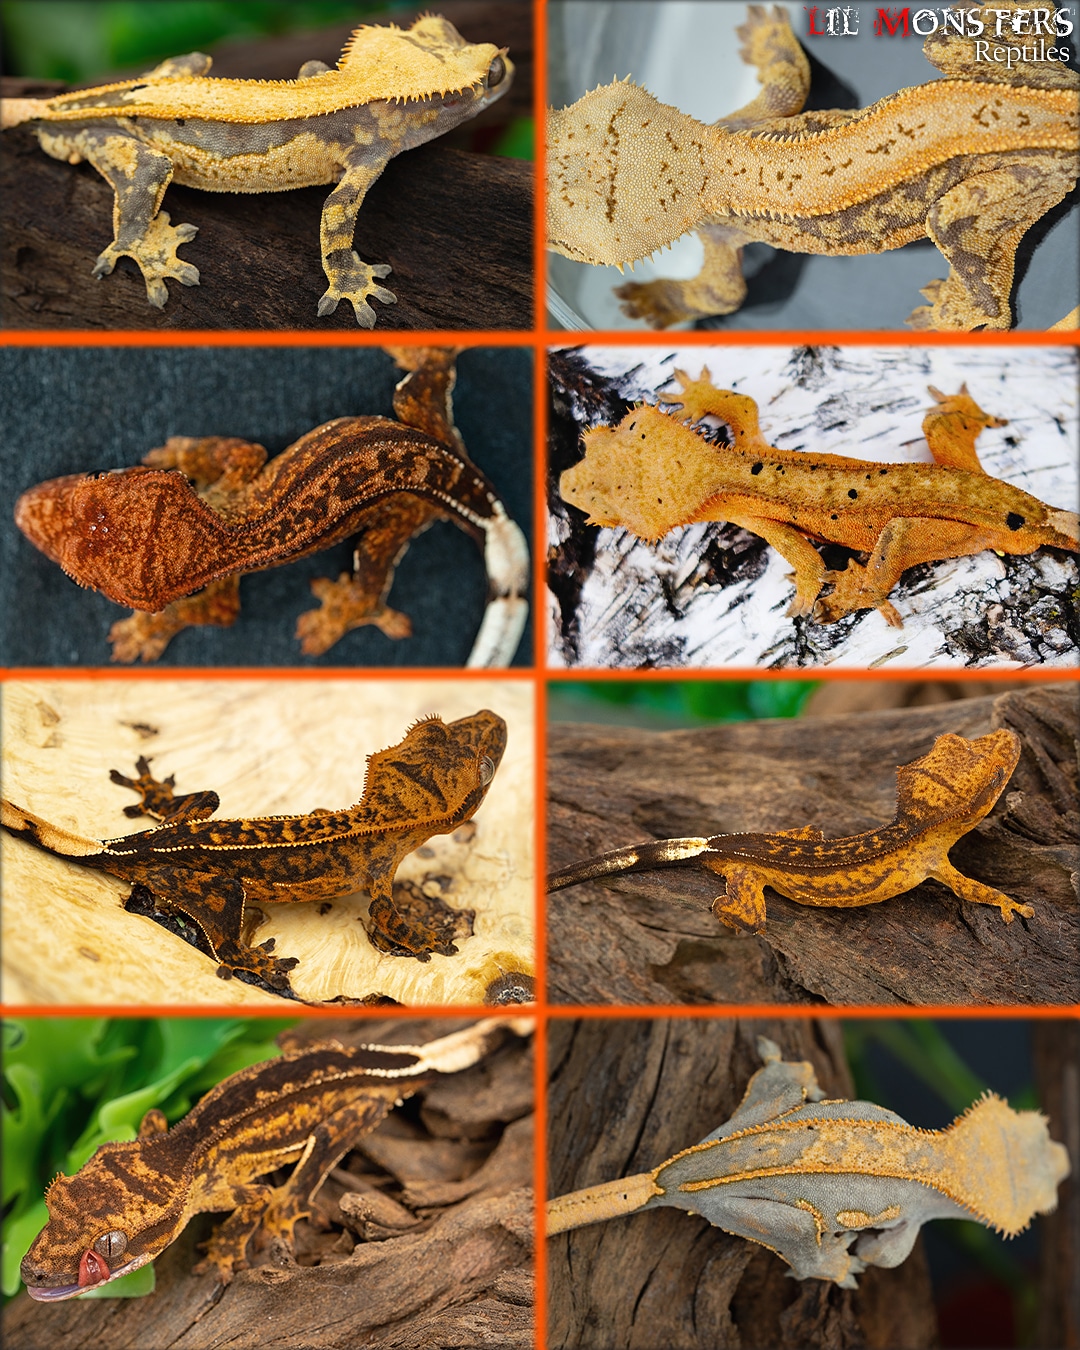 Tangerine Crested Geckos by Lil Monster Reptiles